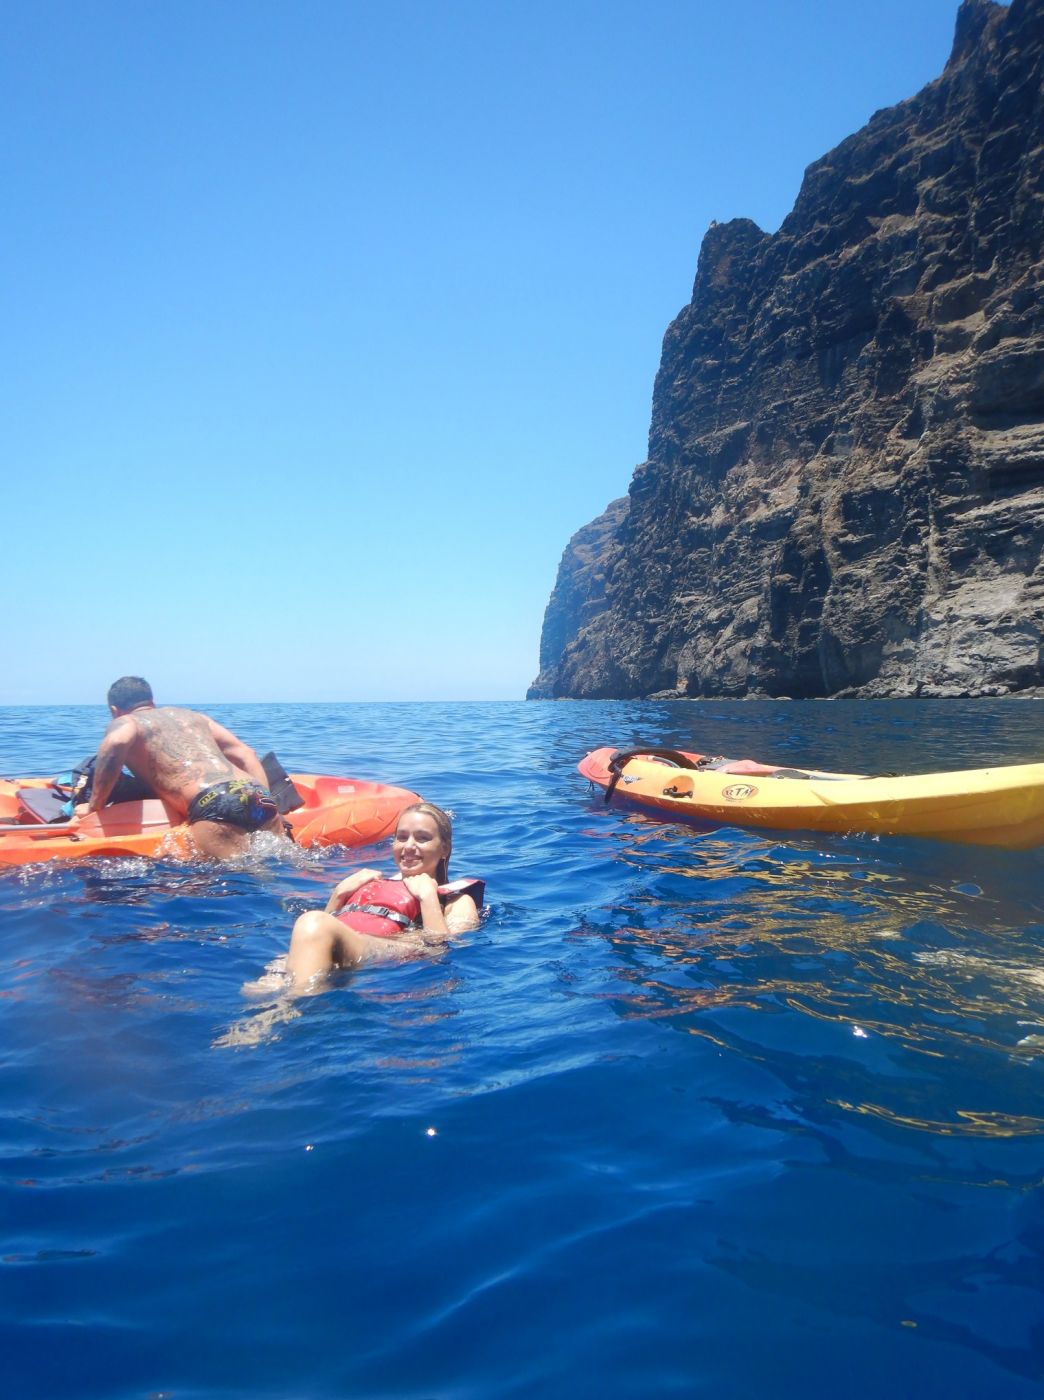 People swimming and kayaking near the cliffs.